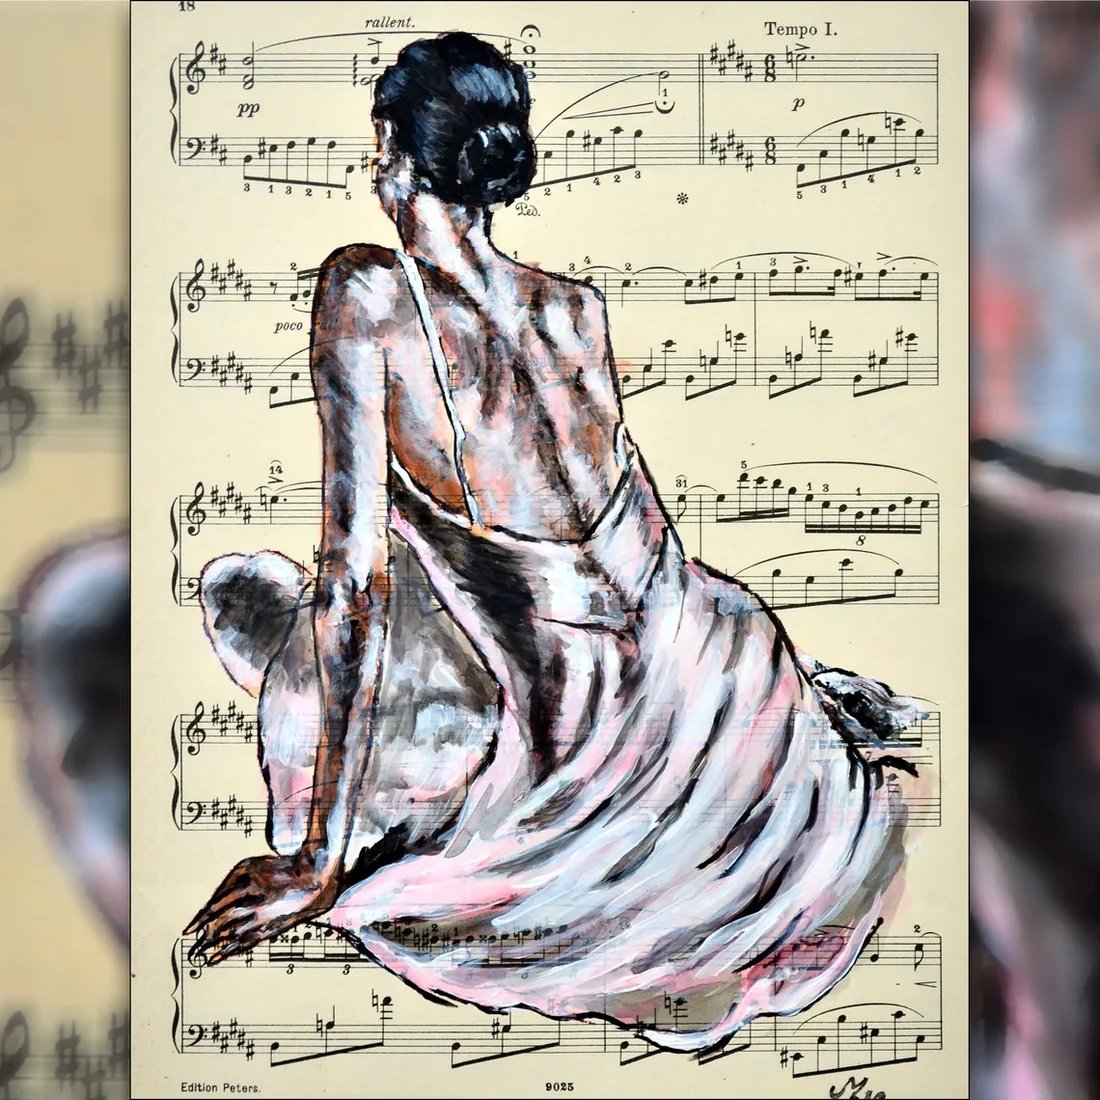 Now the Sale price is GBP 89.00! Ready for #gift! “Framed #Ballerina III - #Original #Painting on #Vintage Sheet #Music Page” artcursor.com/products/frame…